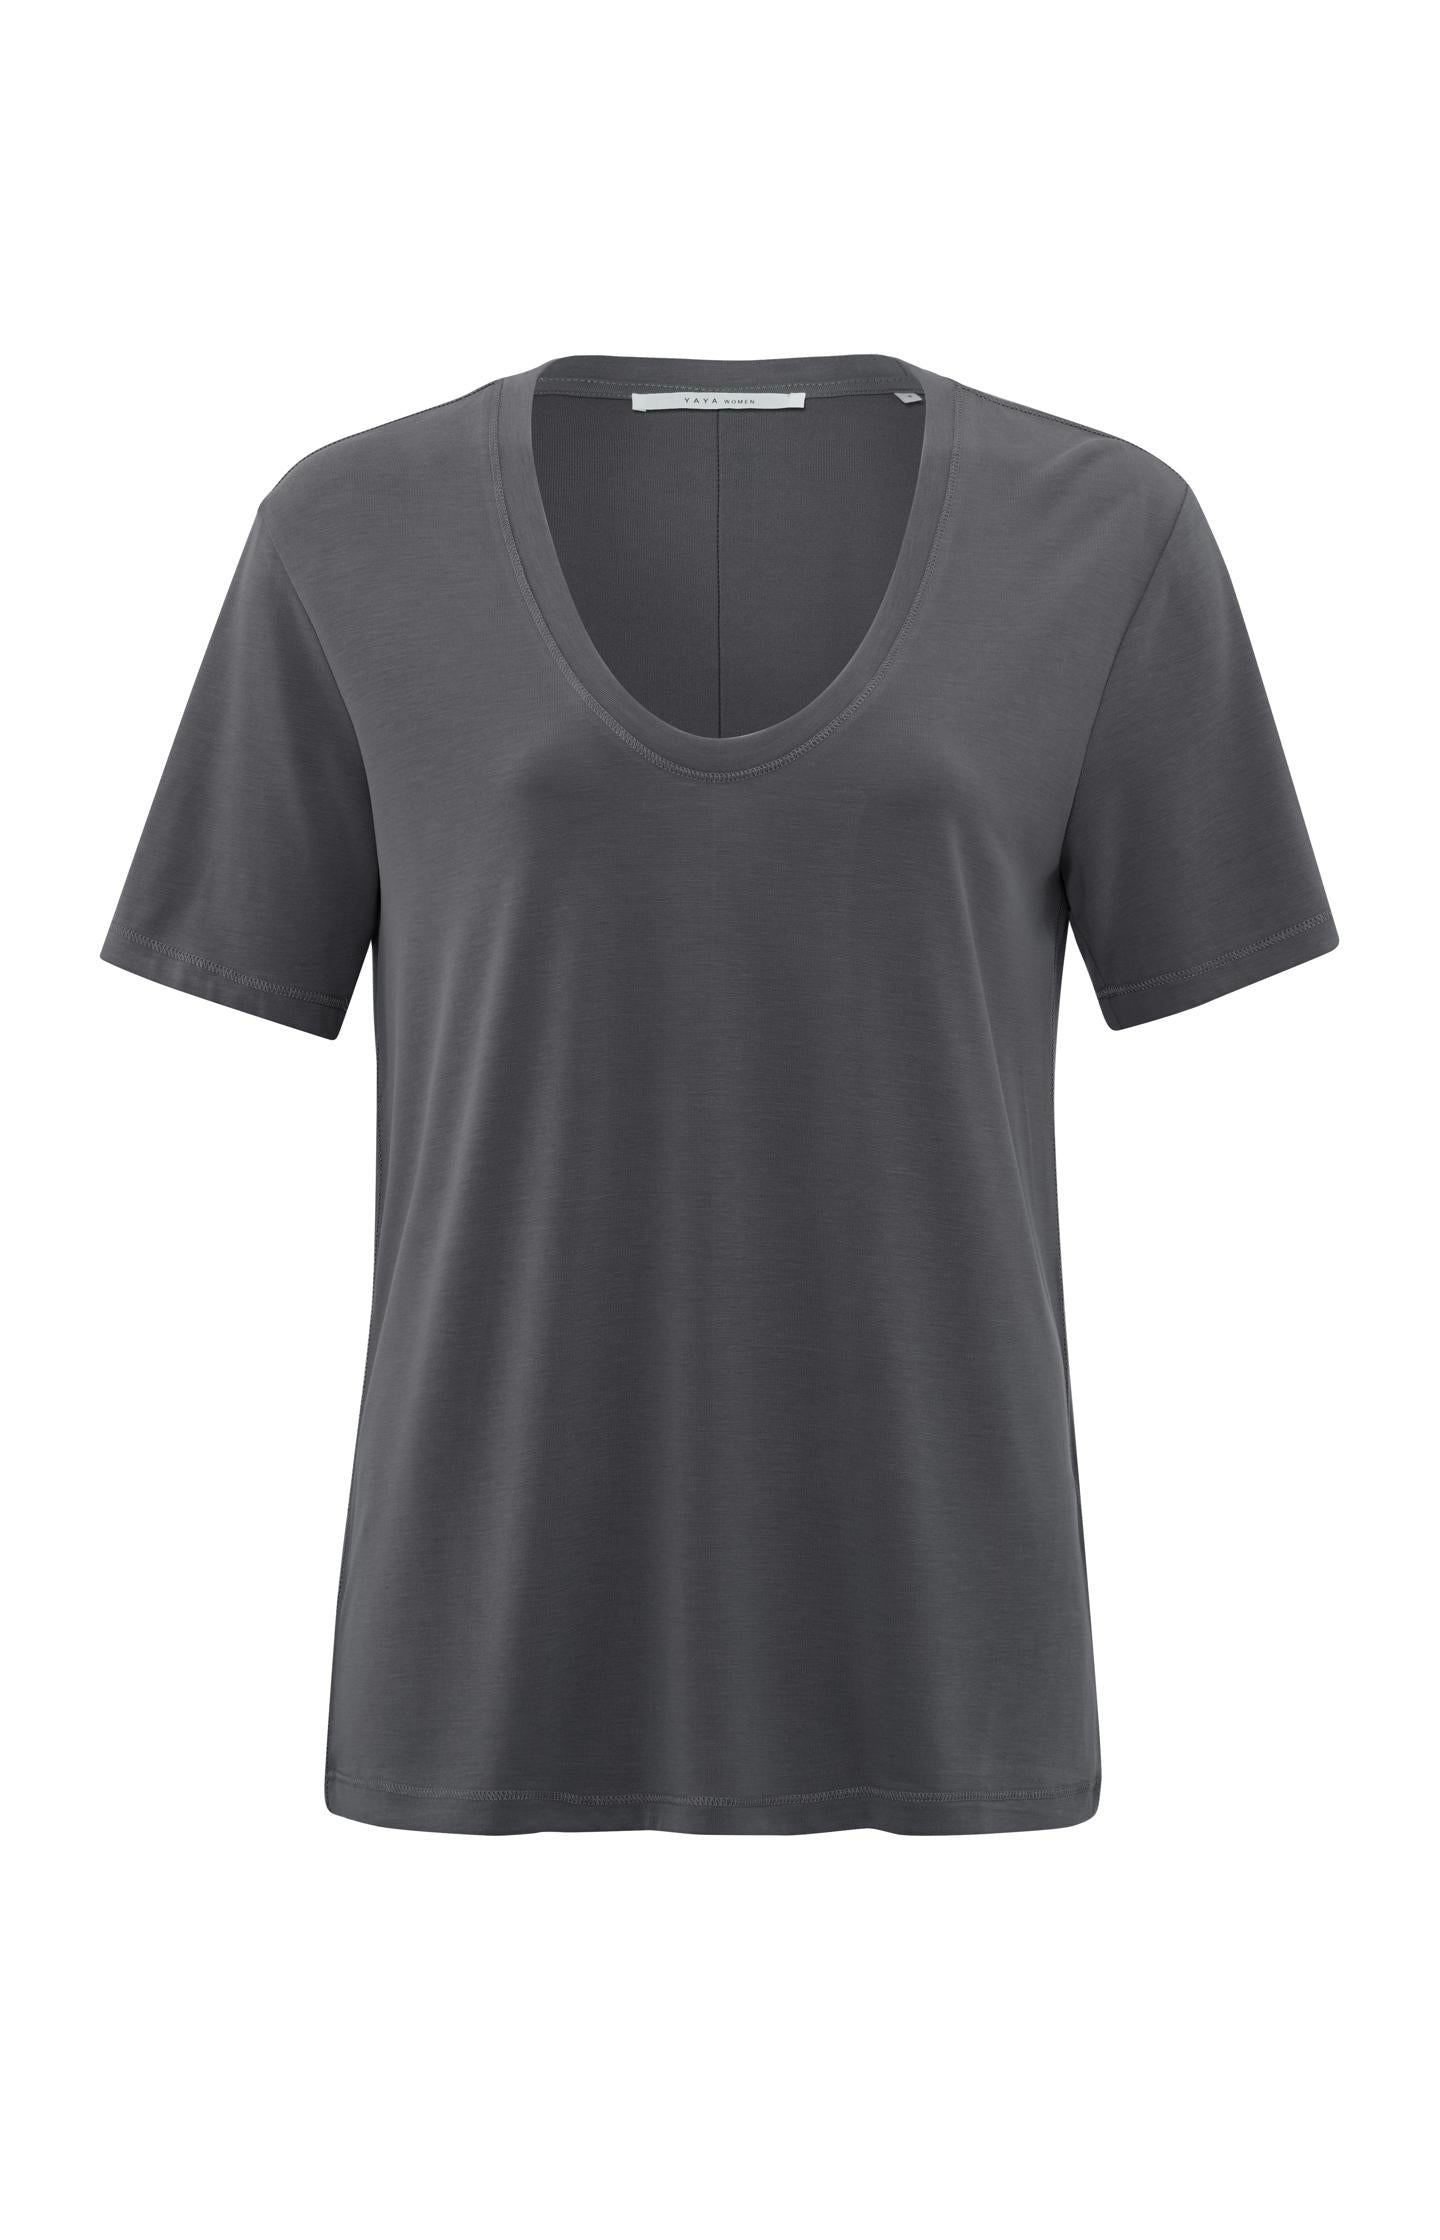 T-shirt with round V-neck and short sleeves in regular fit - Type: product